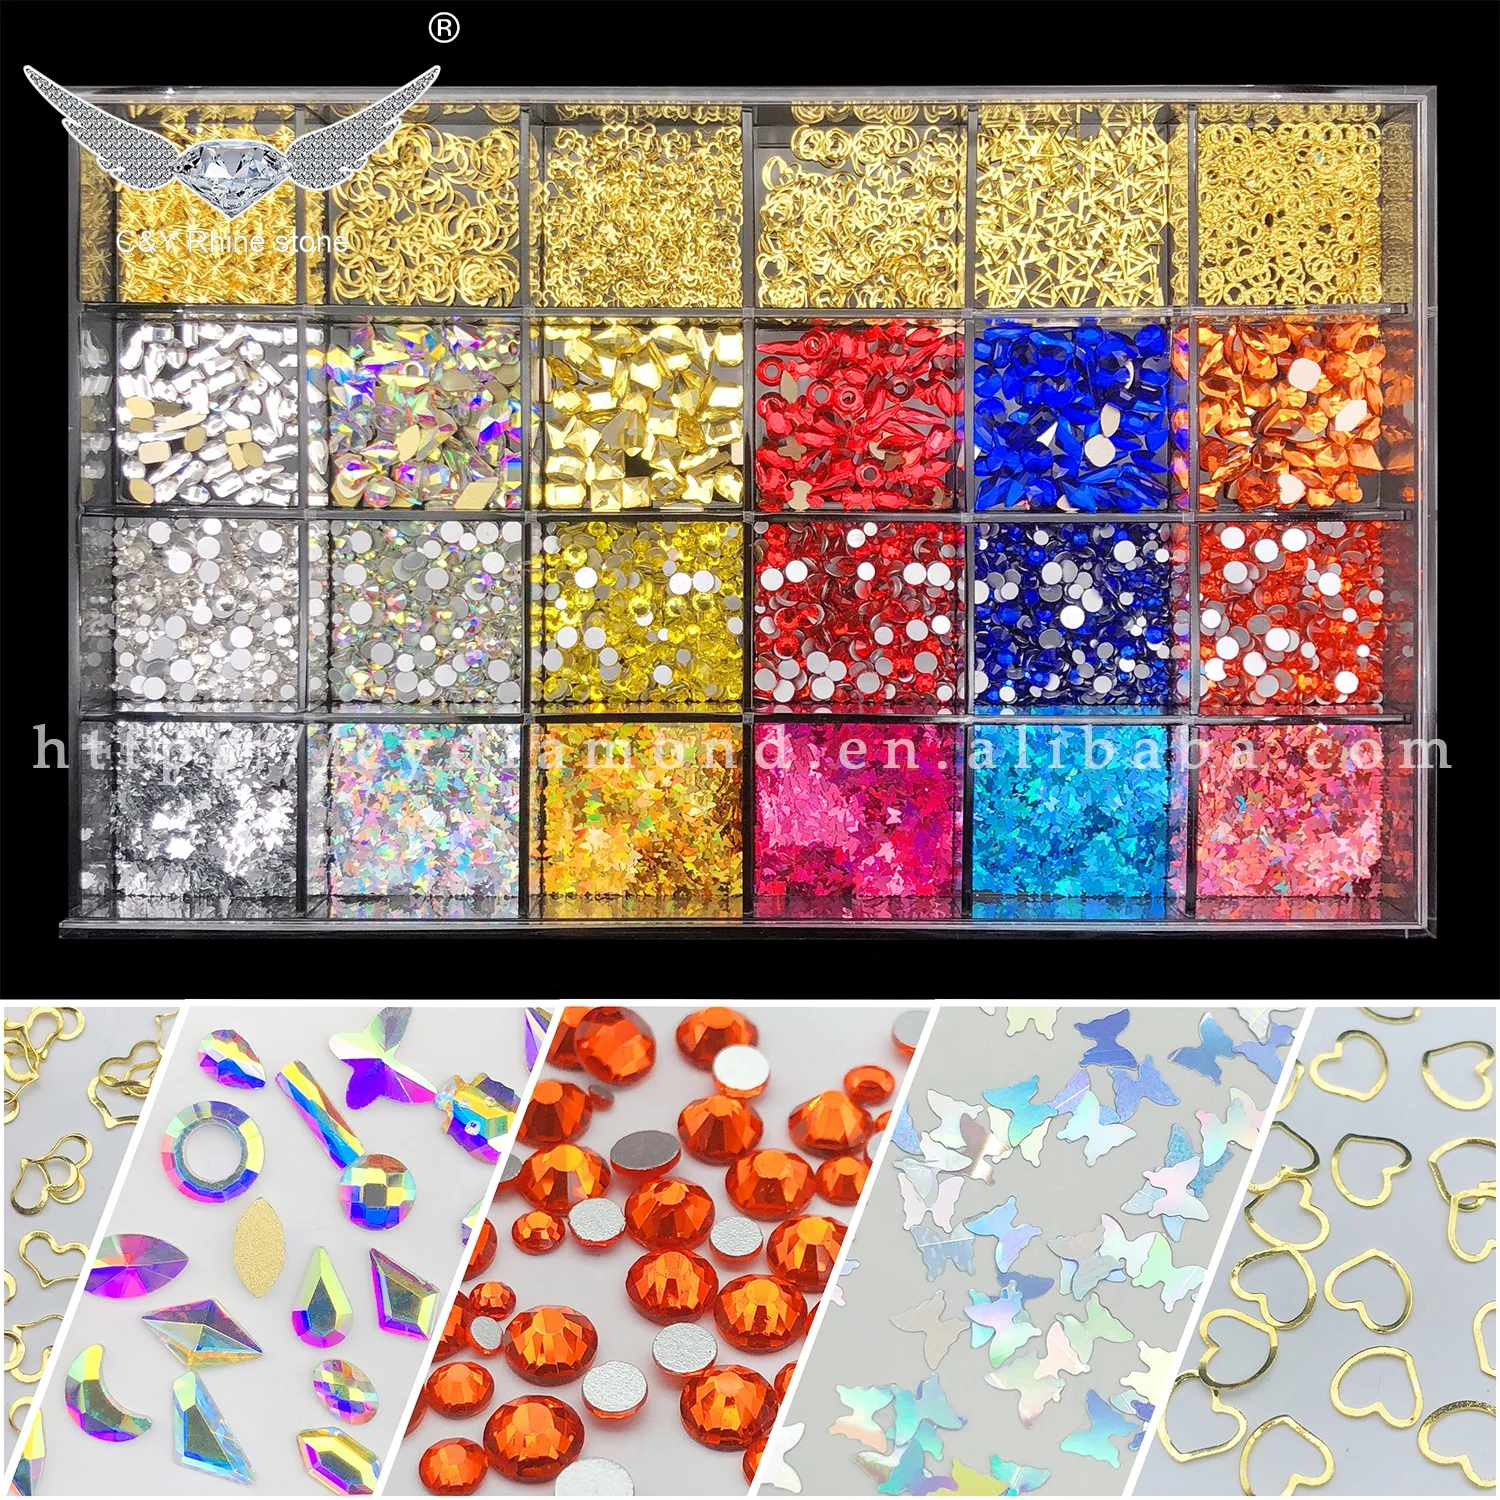 

B4 Nail Art Accessories Sizes Stones Decoration Crystals Mixed Shapes For Nails Rhinestone